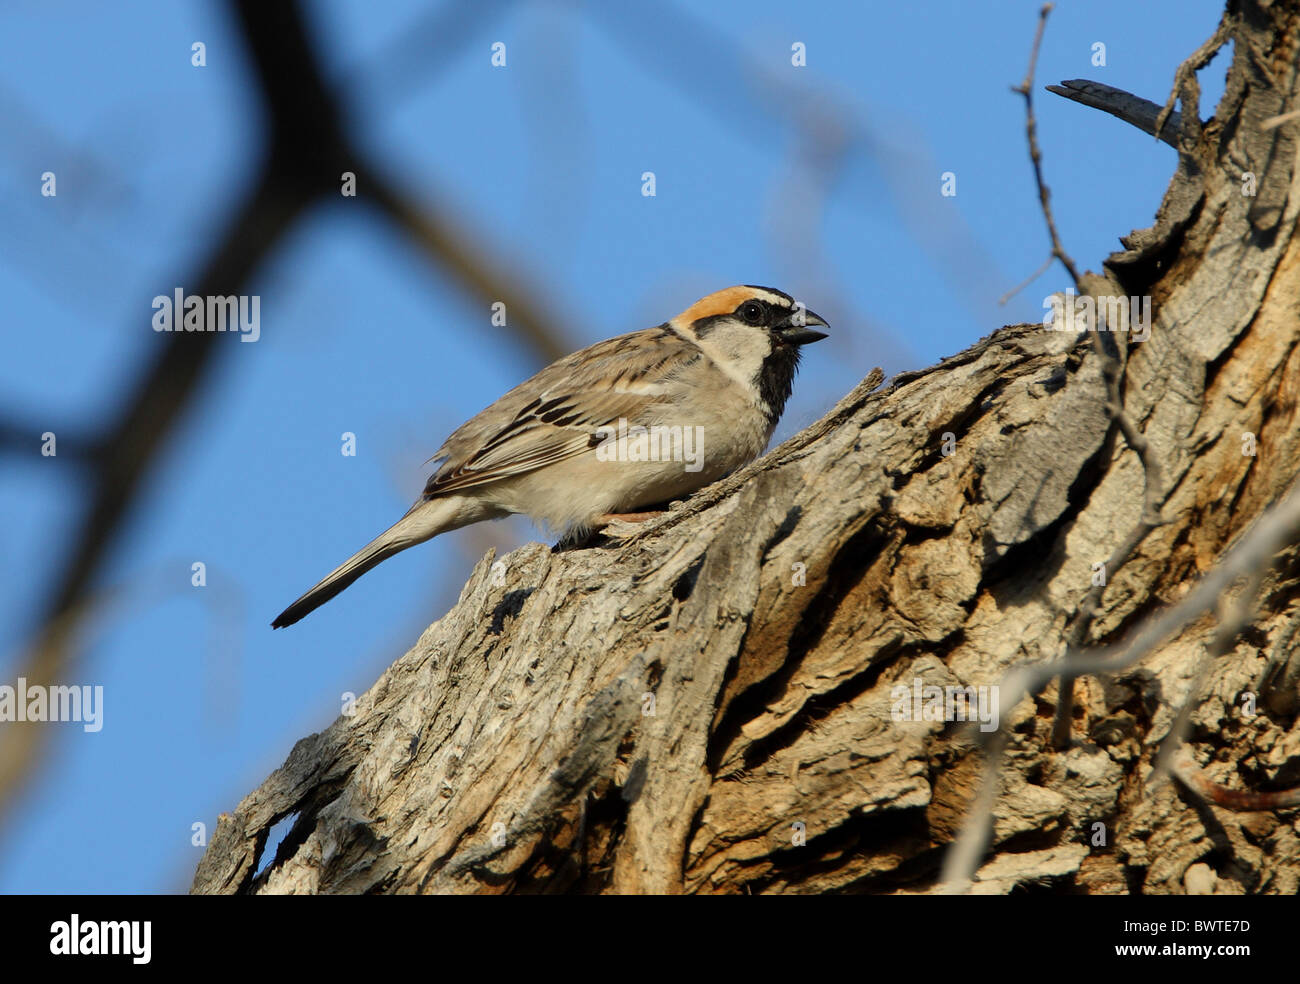 Saxaul Sparrow (Passer ammodendri nigricans) adult, calling, perched on tree trunk, Almaty Province, Kazakhstan, june Stock Photo